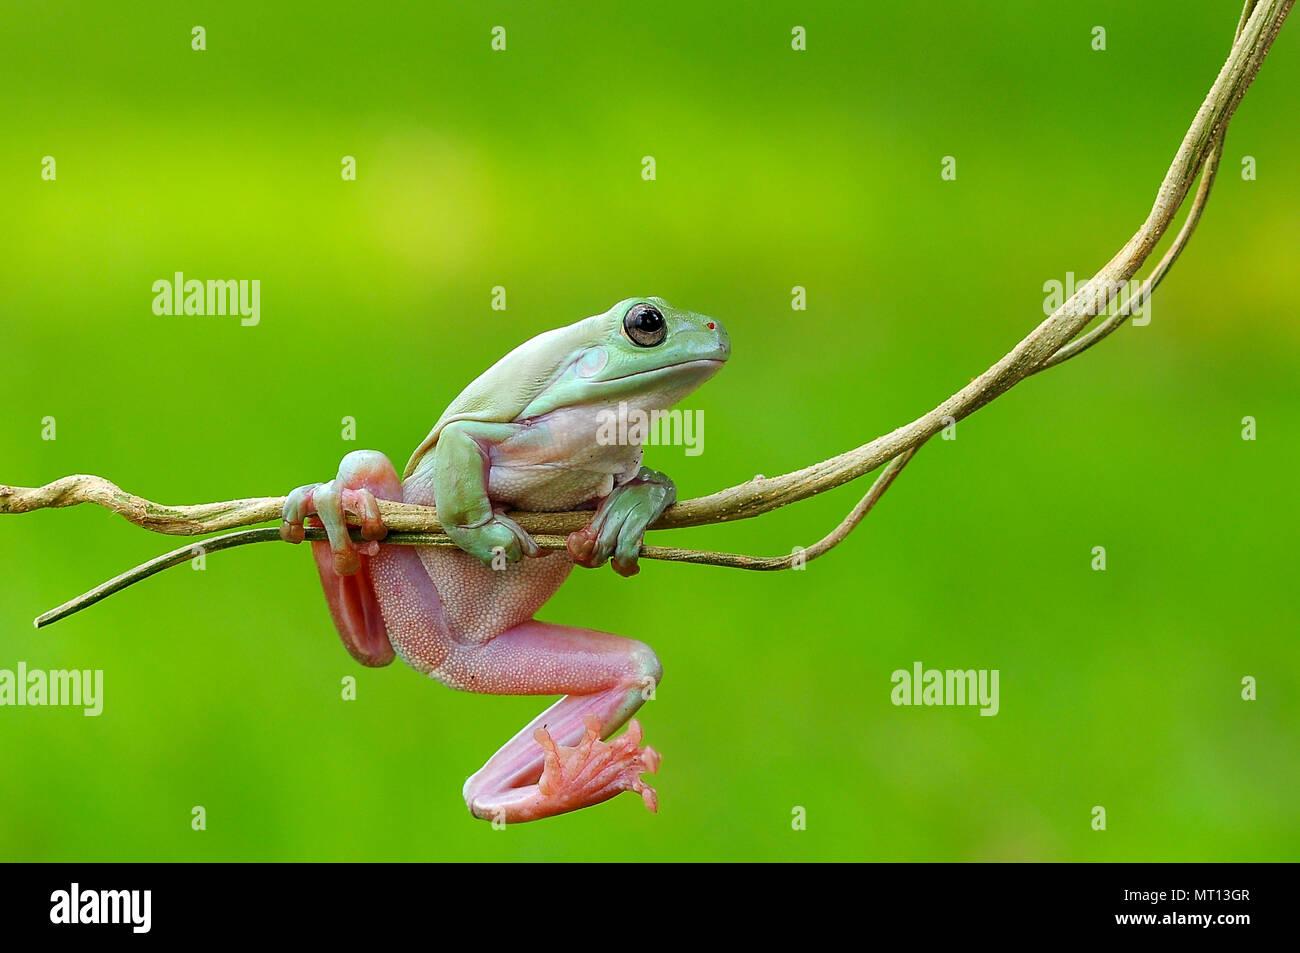 frogs, dumpy frogs, tree frogs on twigs, macro, insect, mammals, animal, reptile, nature, Stock Photo